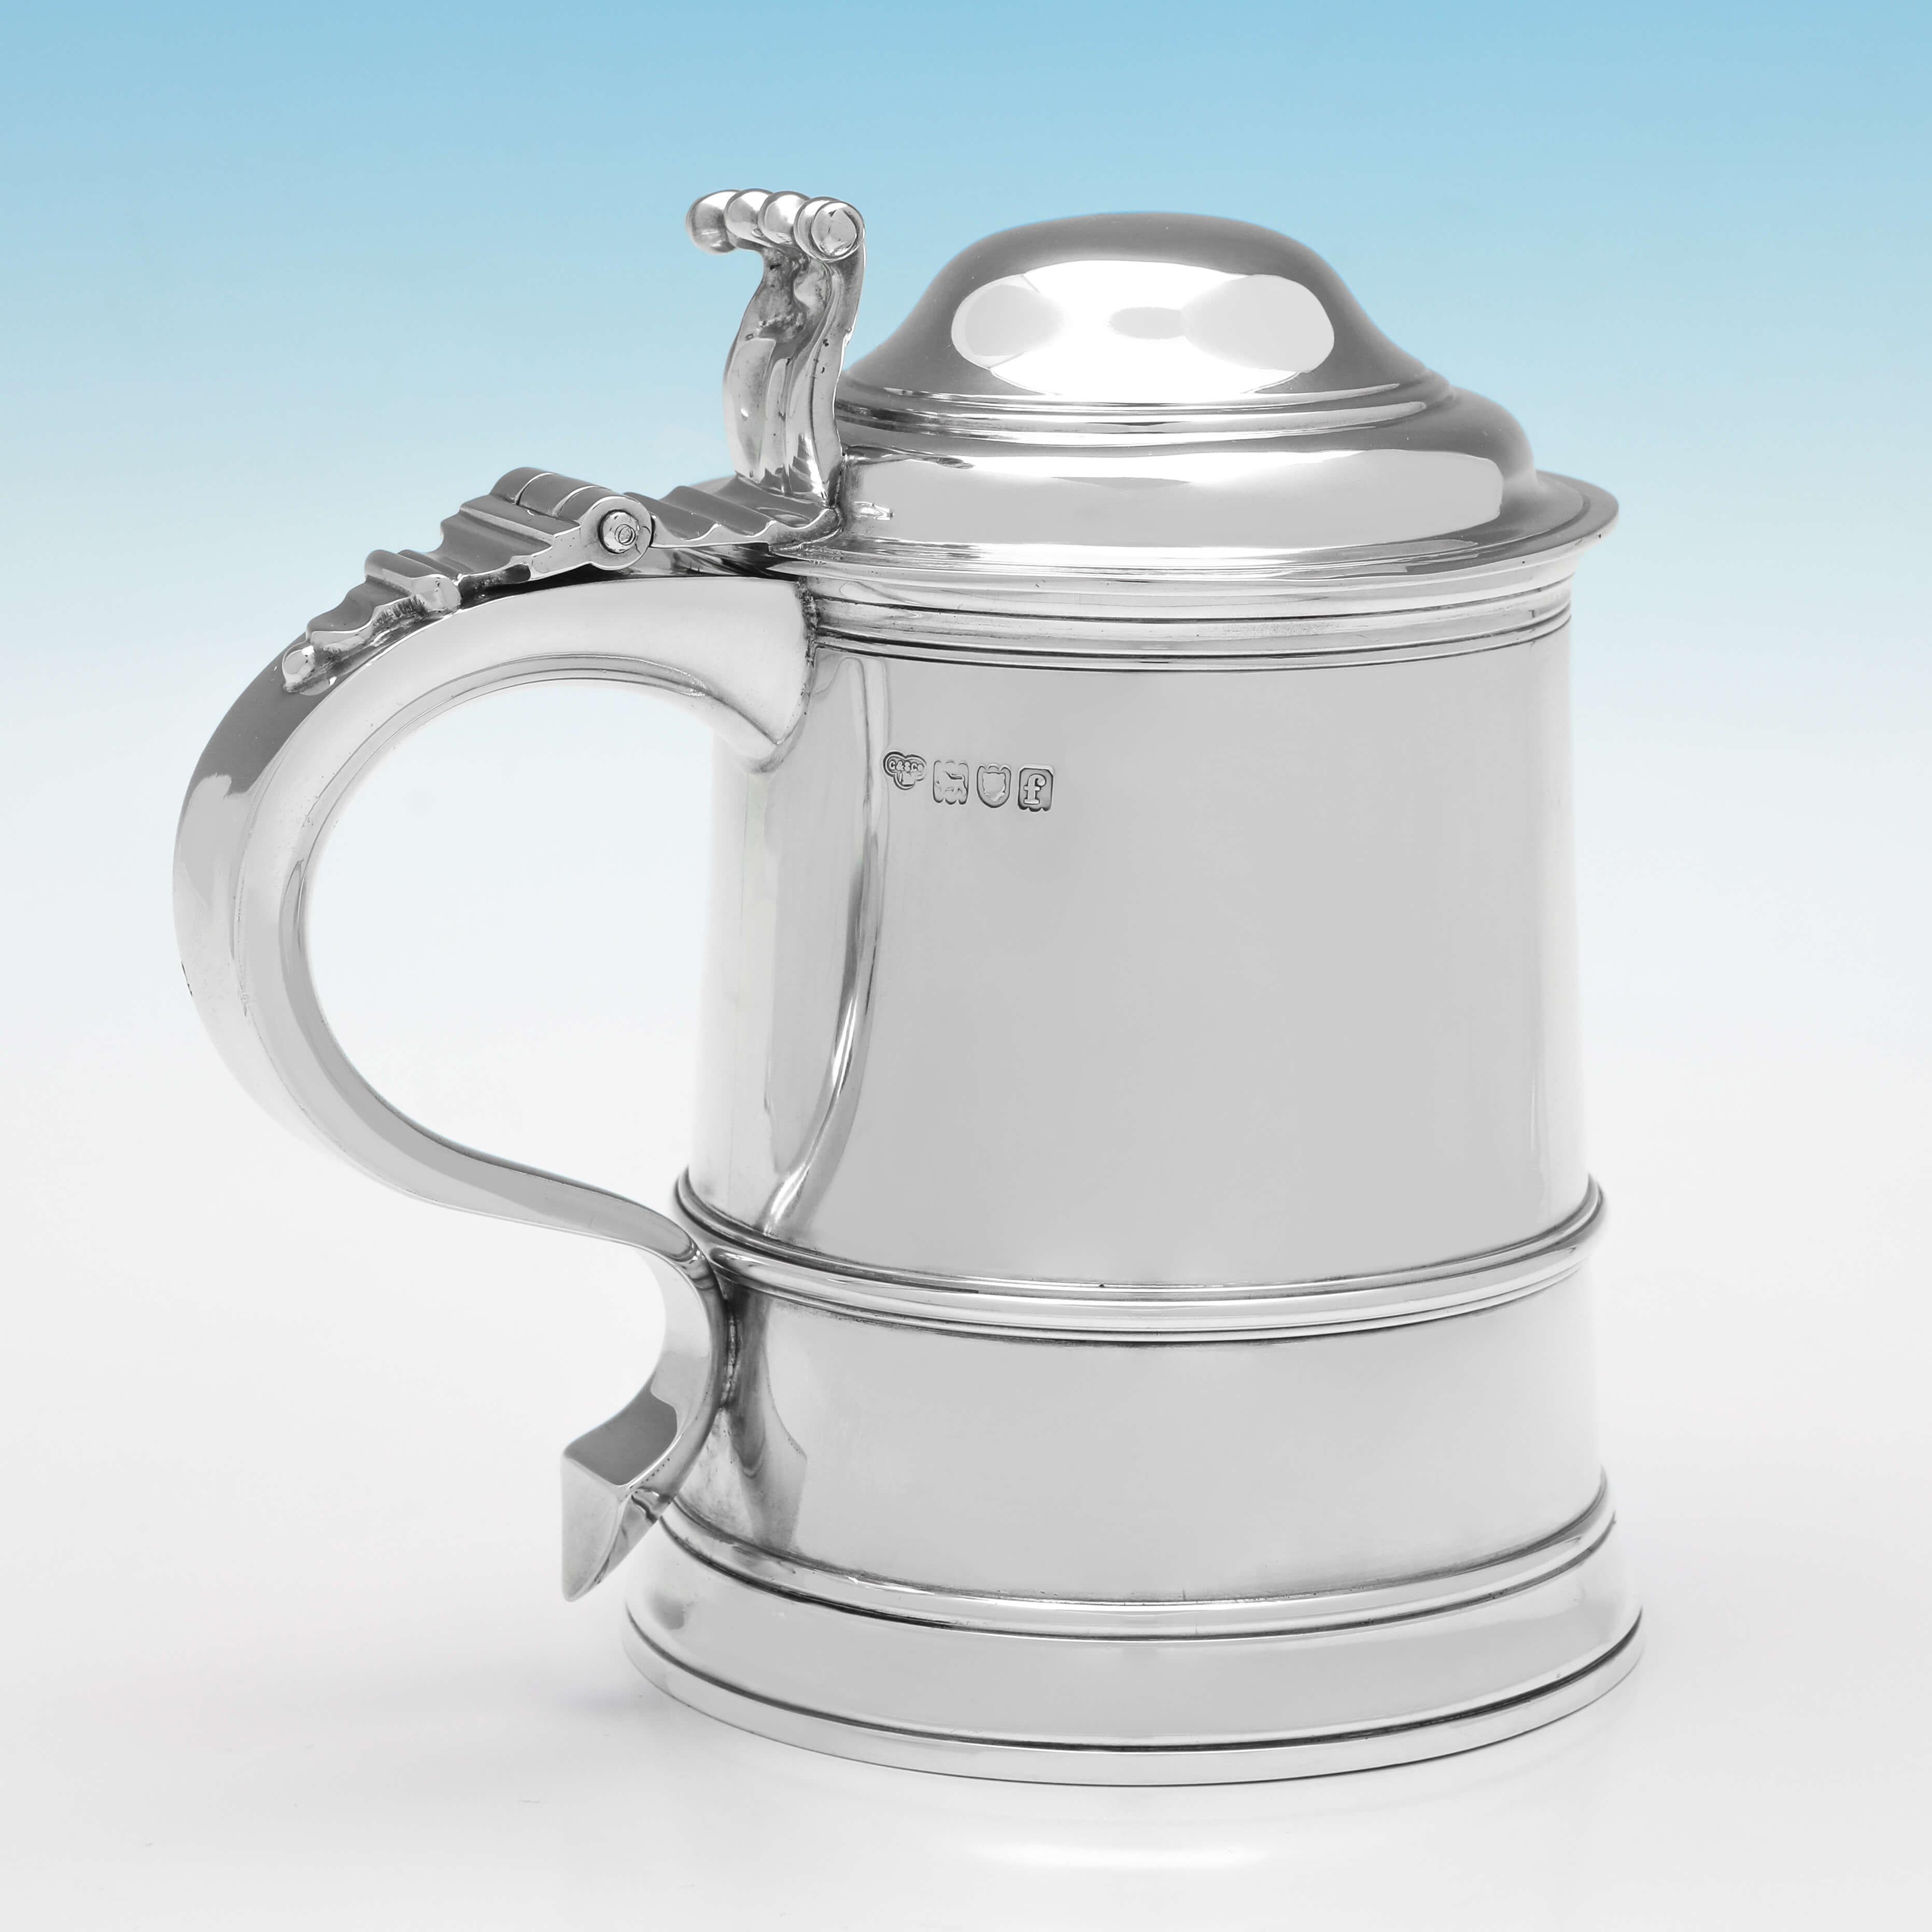 Hallmarked in London in 1901 by Goldsmiths & Silversmiths Co., this handsome, Antique, Sterling Silver Tankard, is straight sided, and features a domed lid and reed detailing. 

The tankard measures 5.75